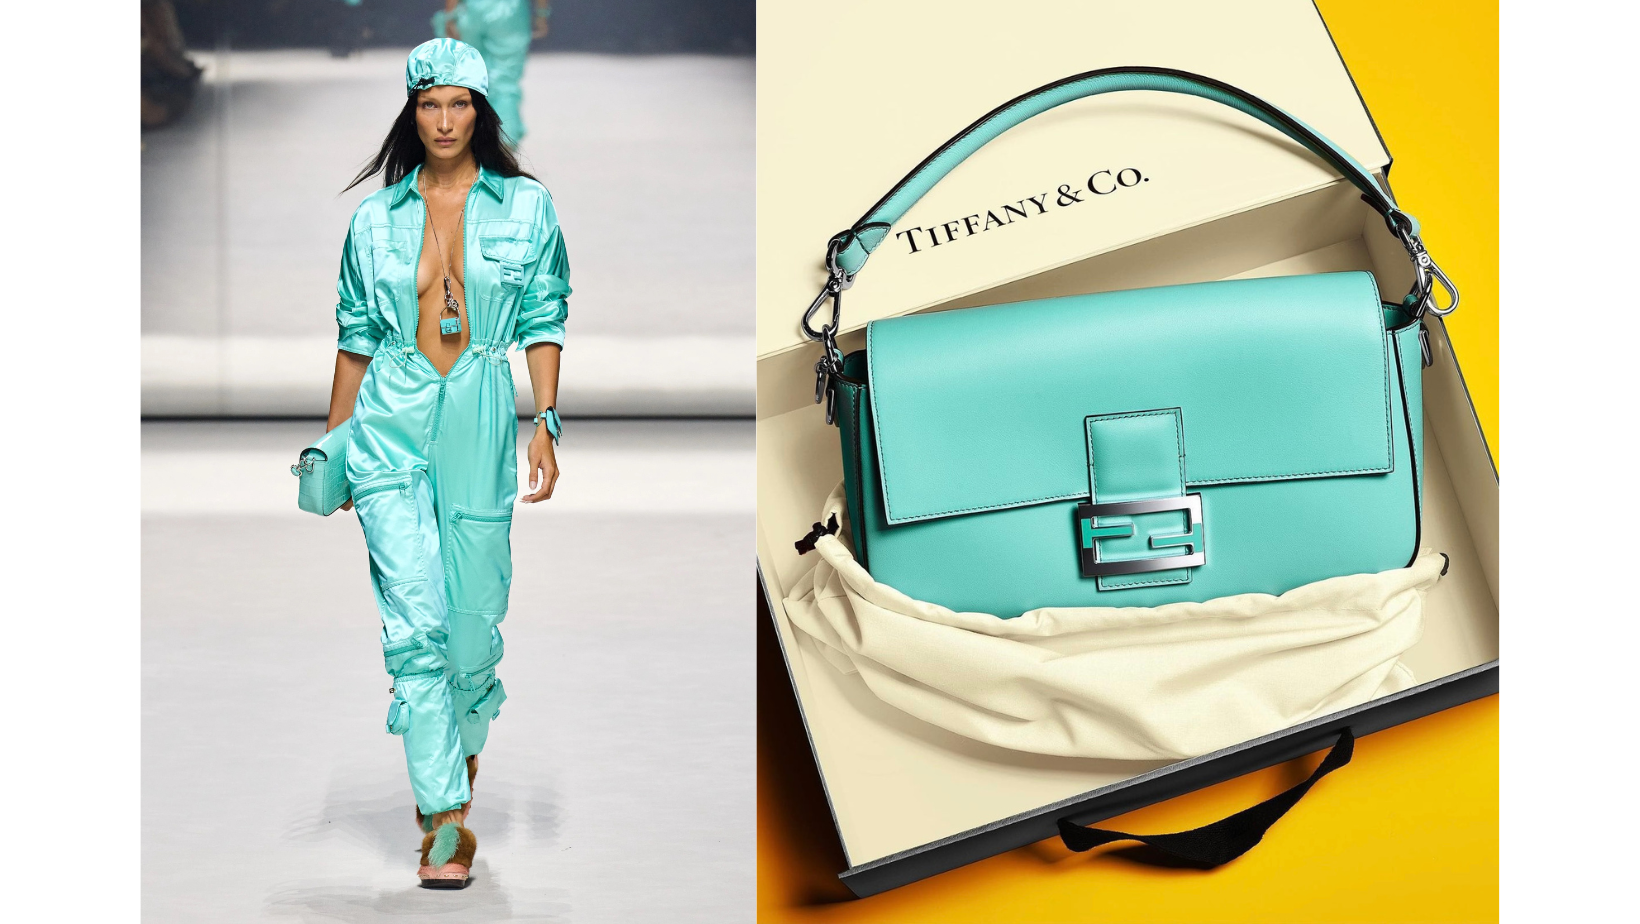 A Tiffany & Co. x Nike Collab is Rumored for 2023
